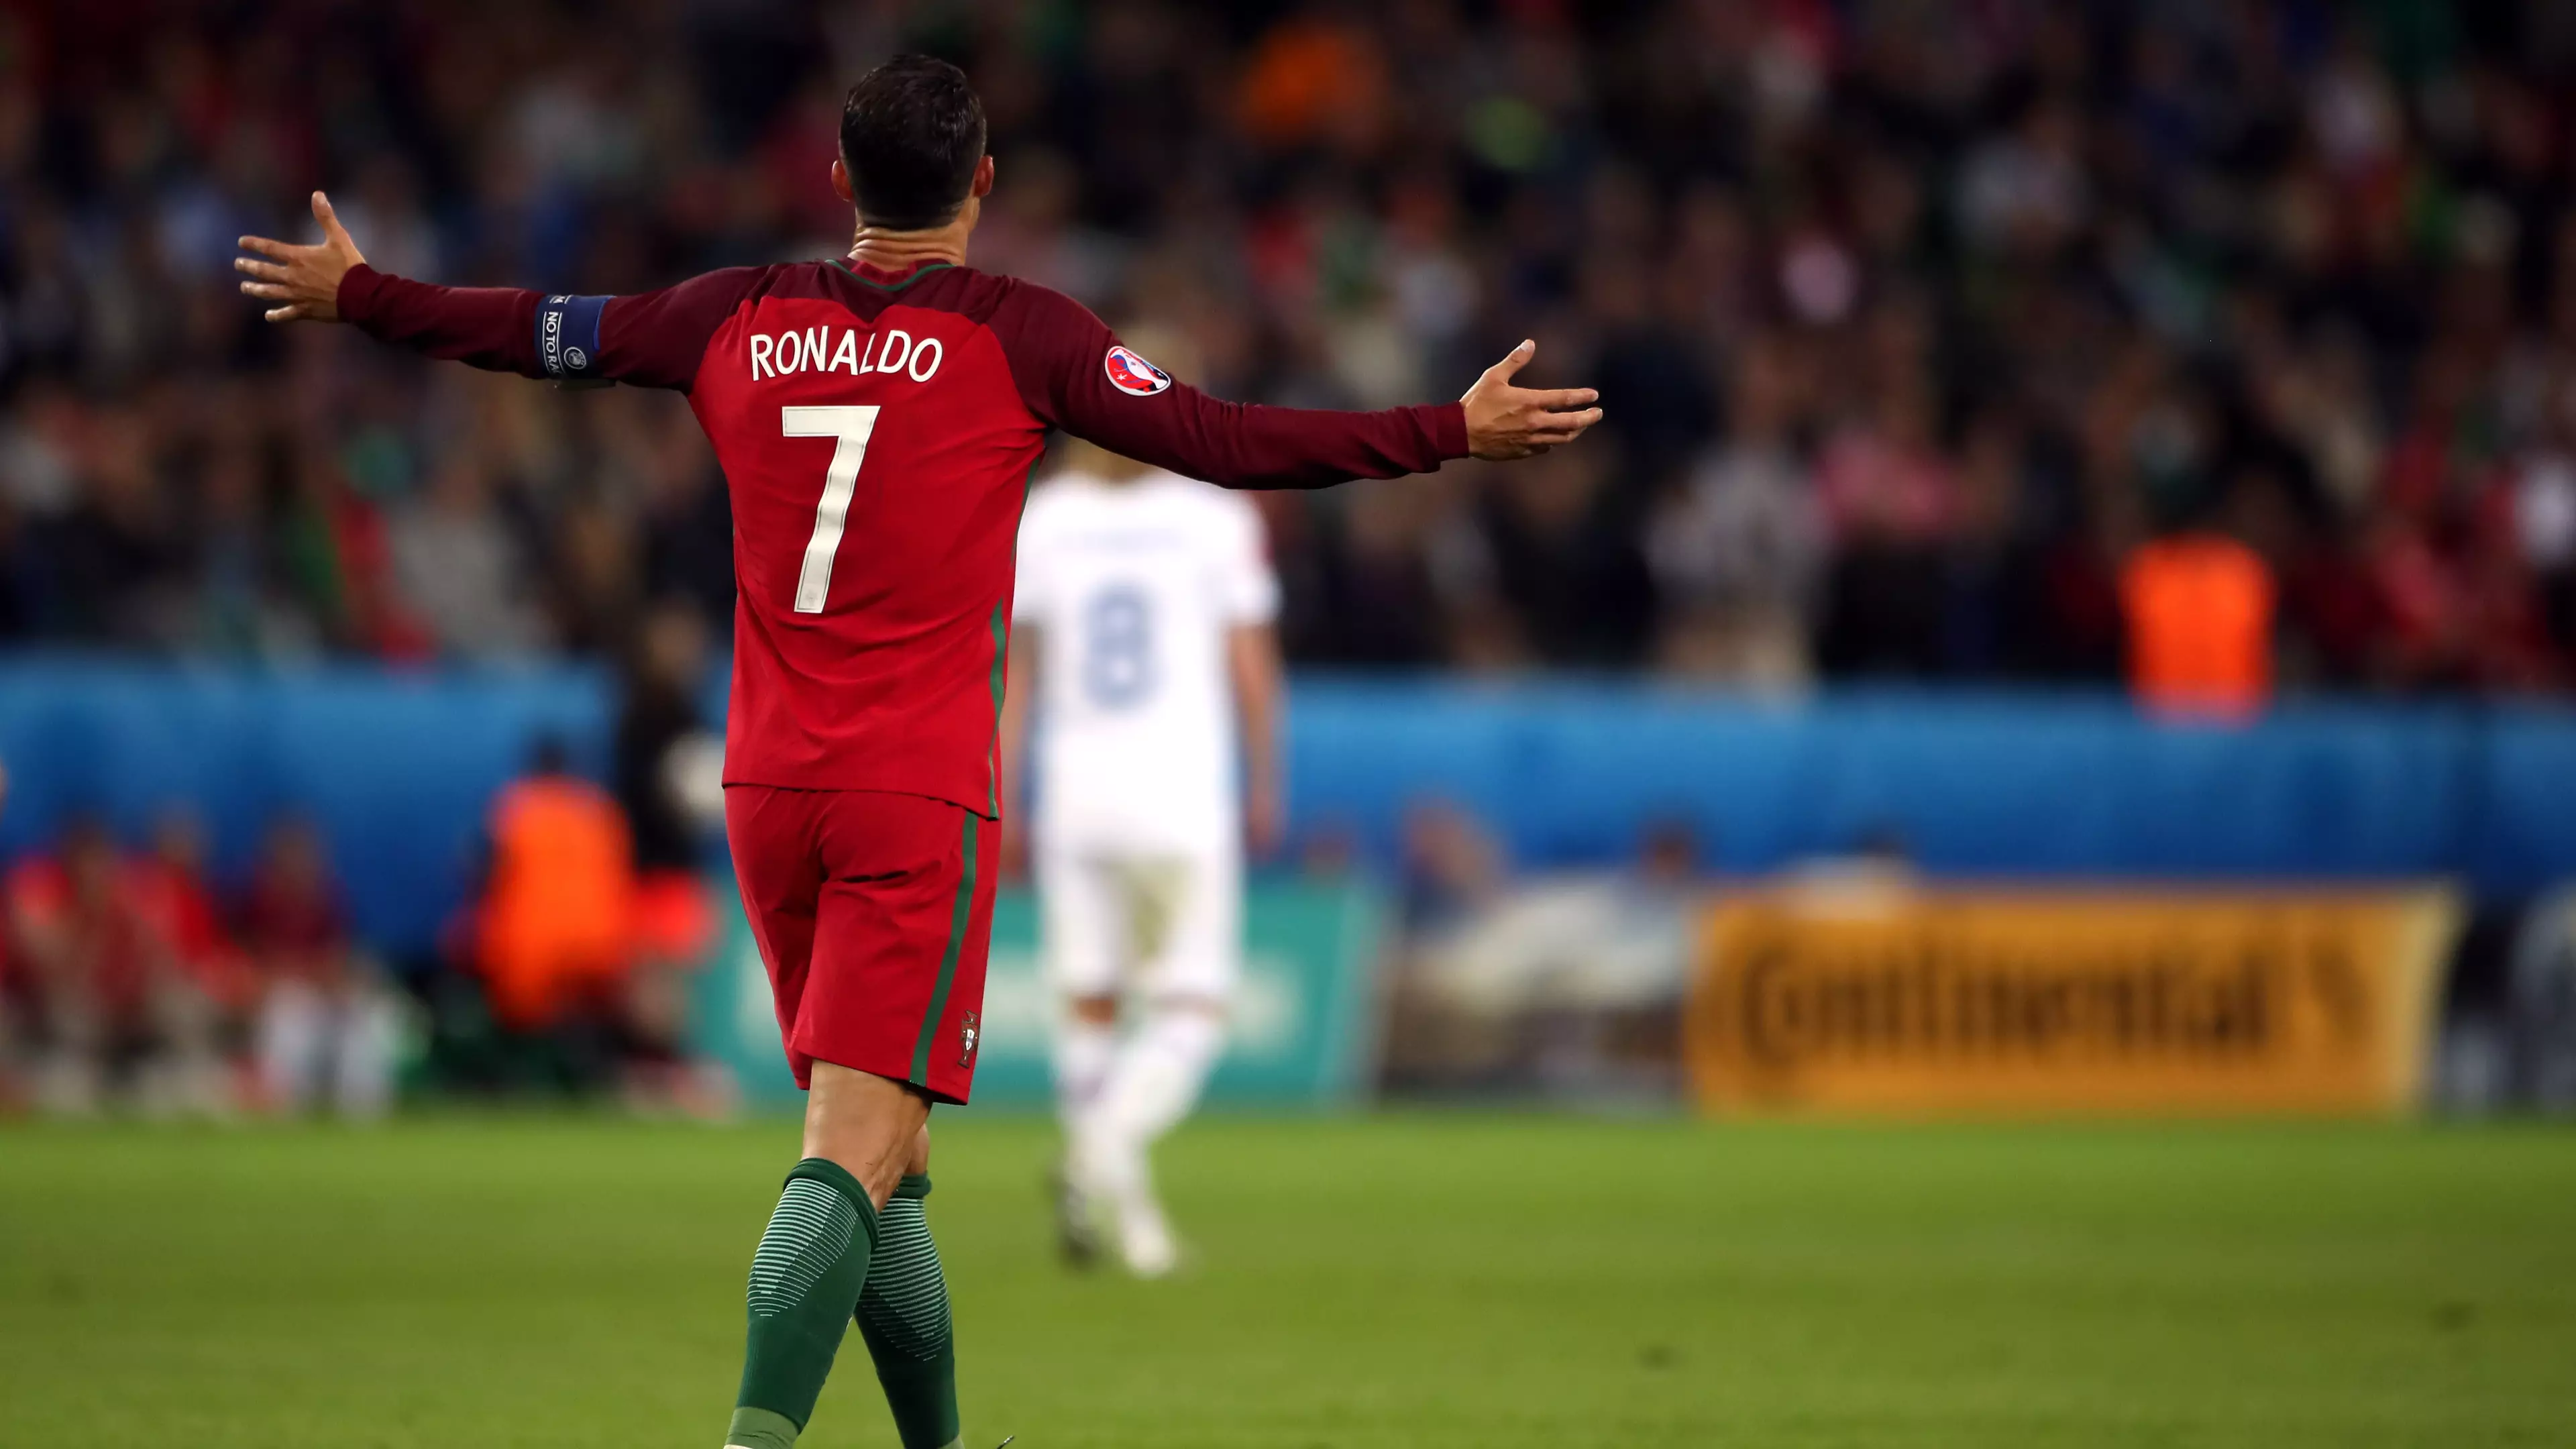 Ireland To Face Cristiano Ronaldo In 2022 World Cup Qualifiers